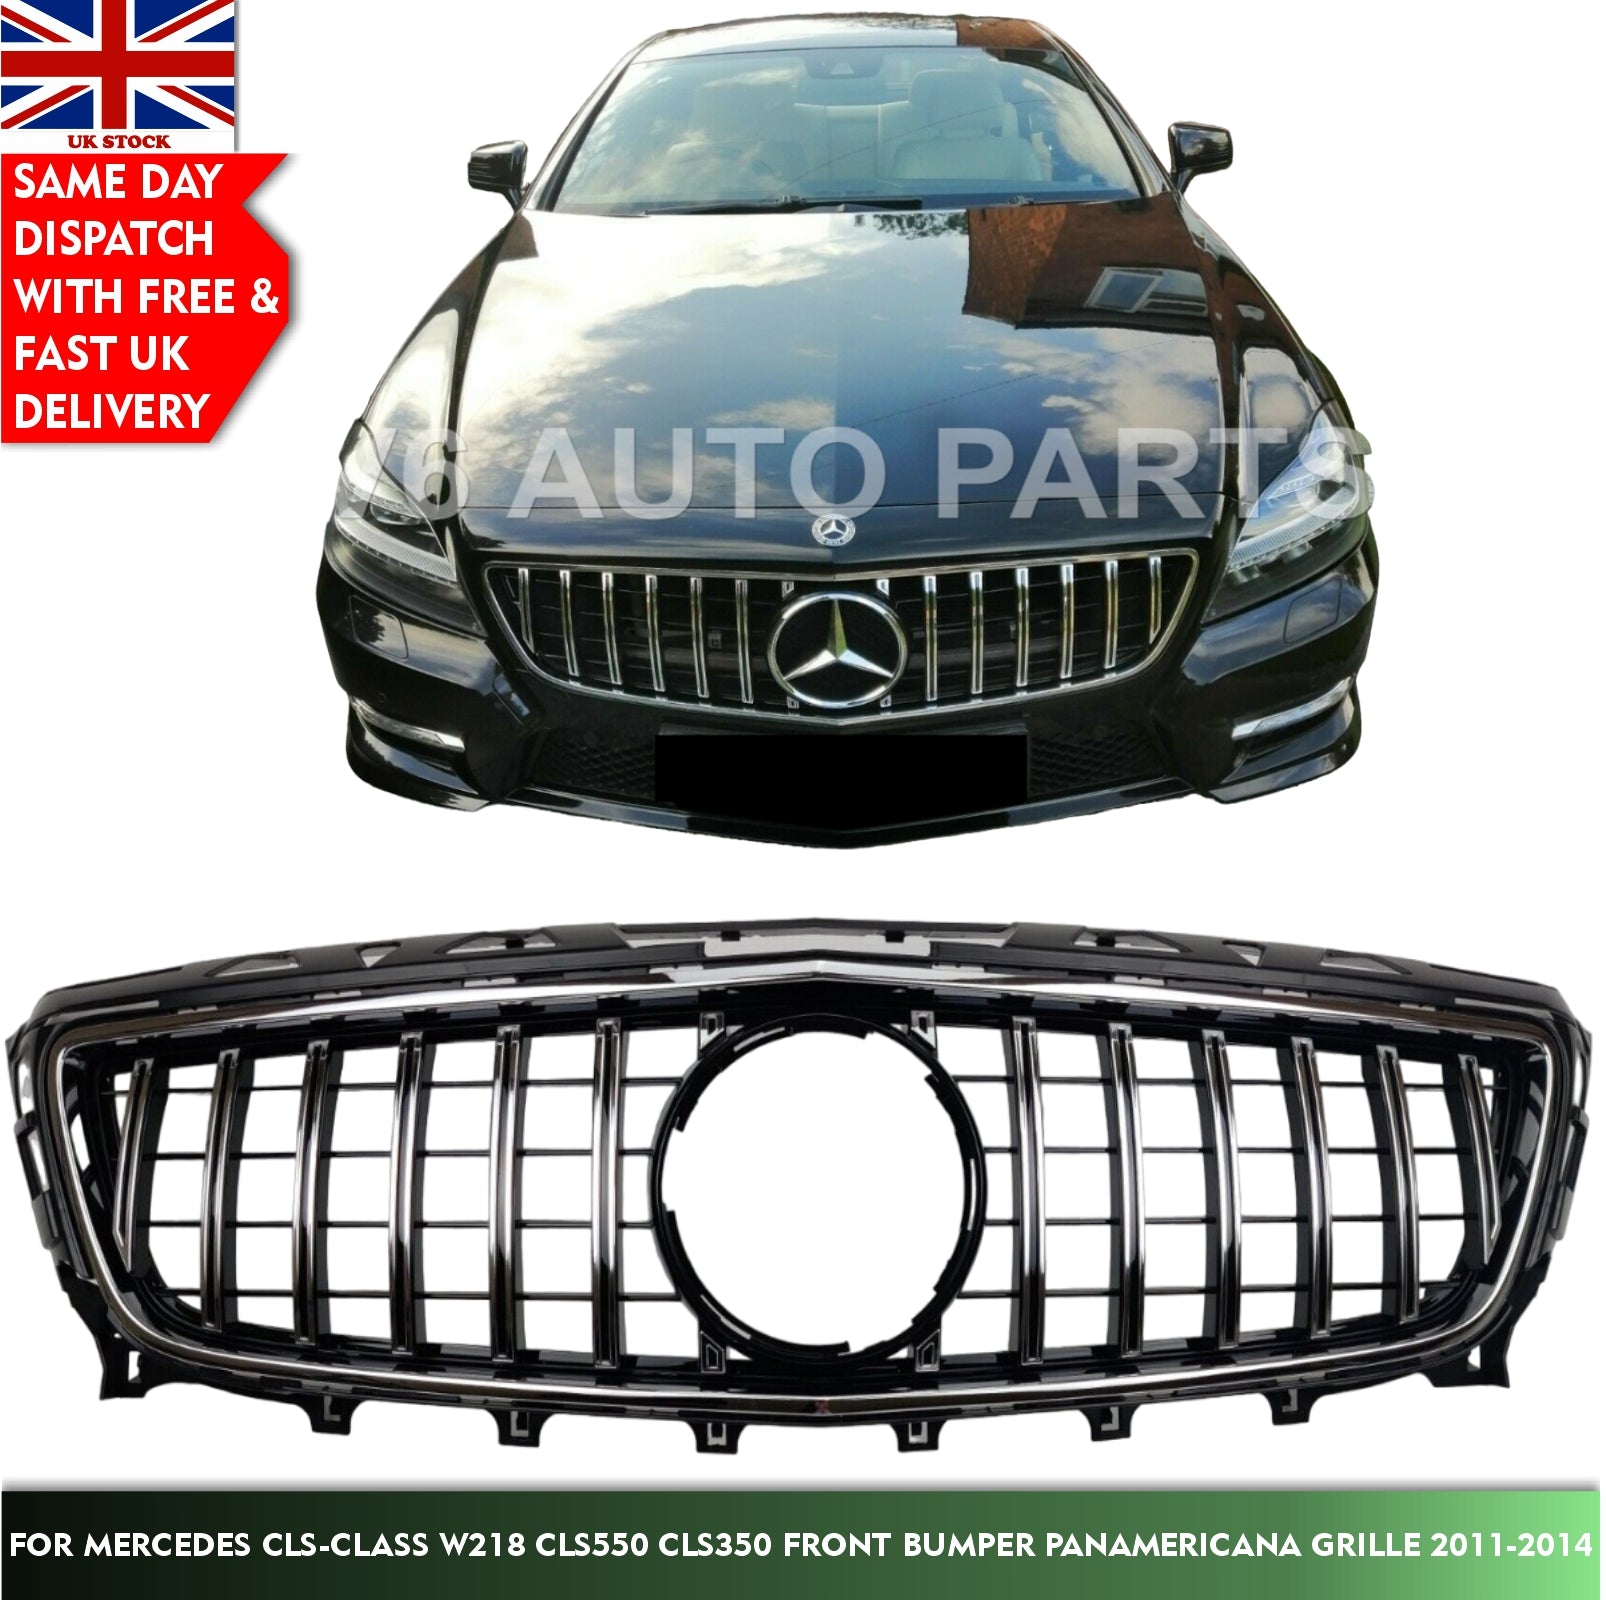 For Mercedes CLS-Class C218 CLS350 Front Radiator Grille Panamericana 2011-2014